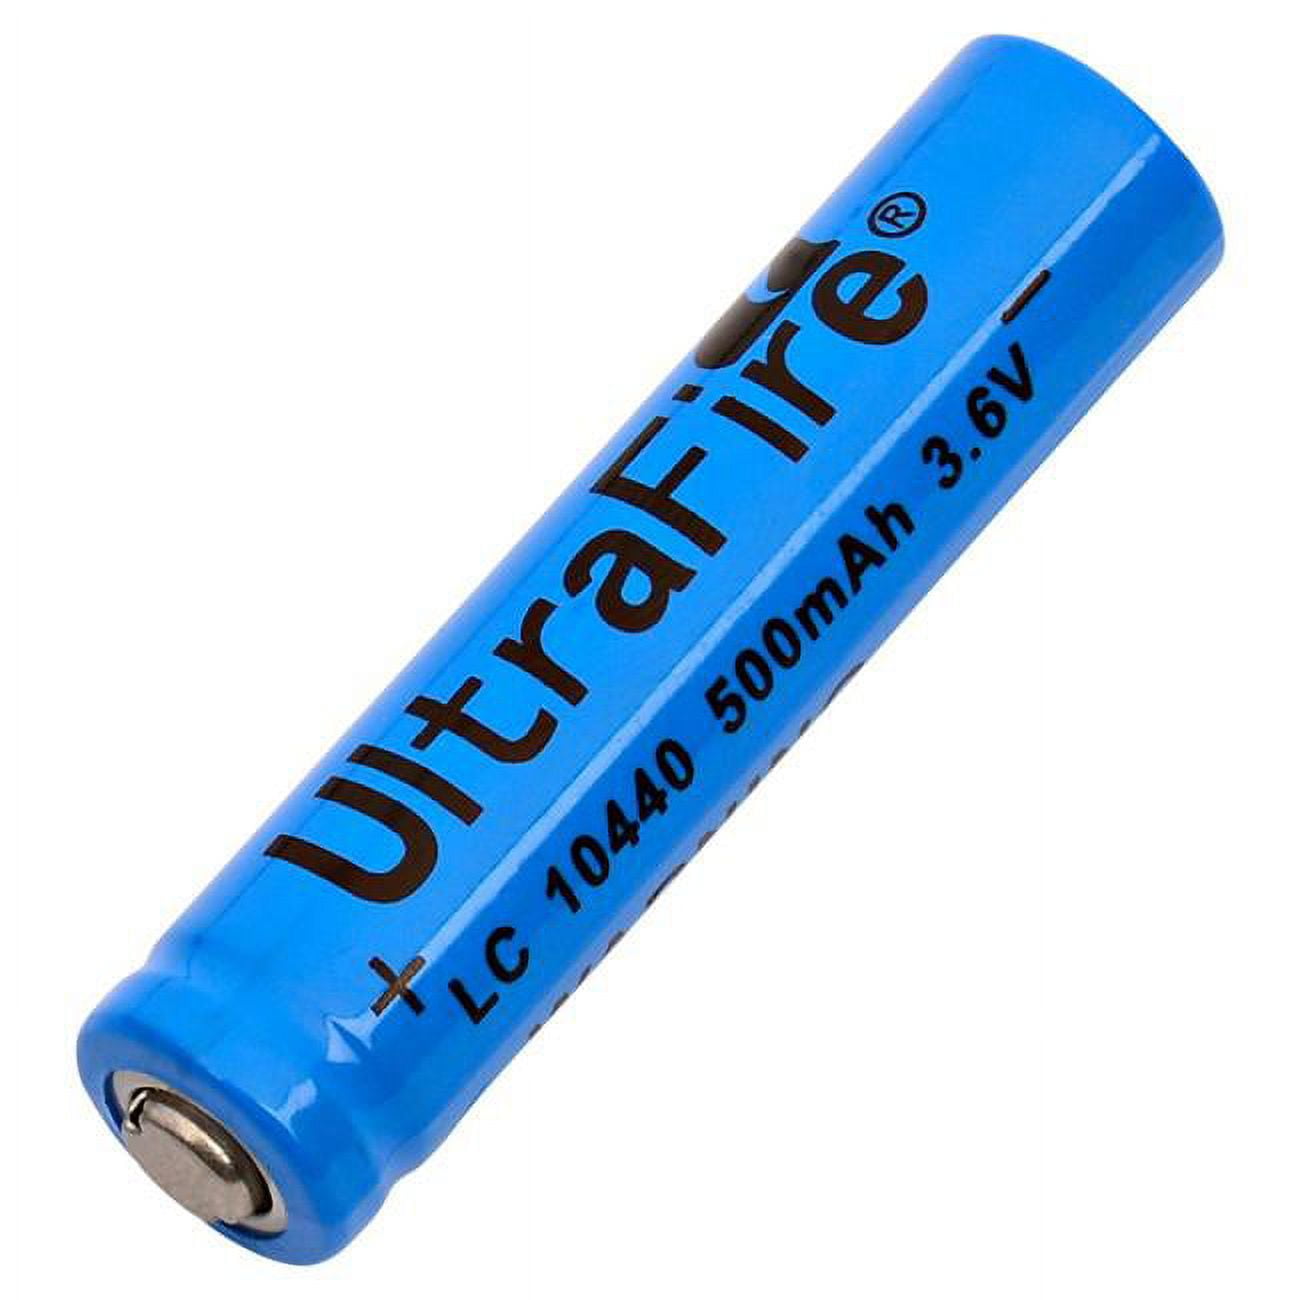 Picture of Ultrafire LION-1044-50NP-UF 3.6V & 500 mAh Replacement Flashlight Battery for 10440